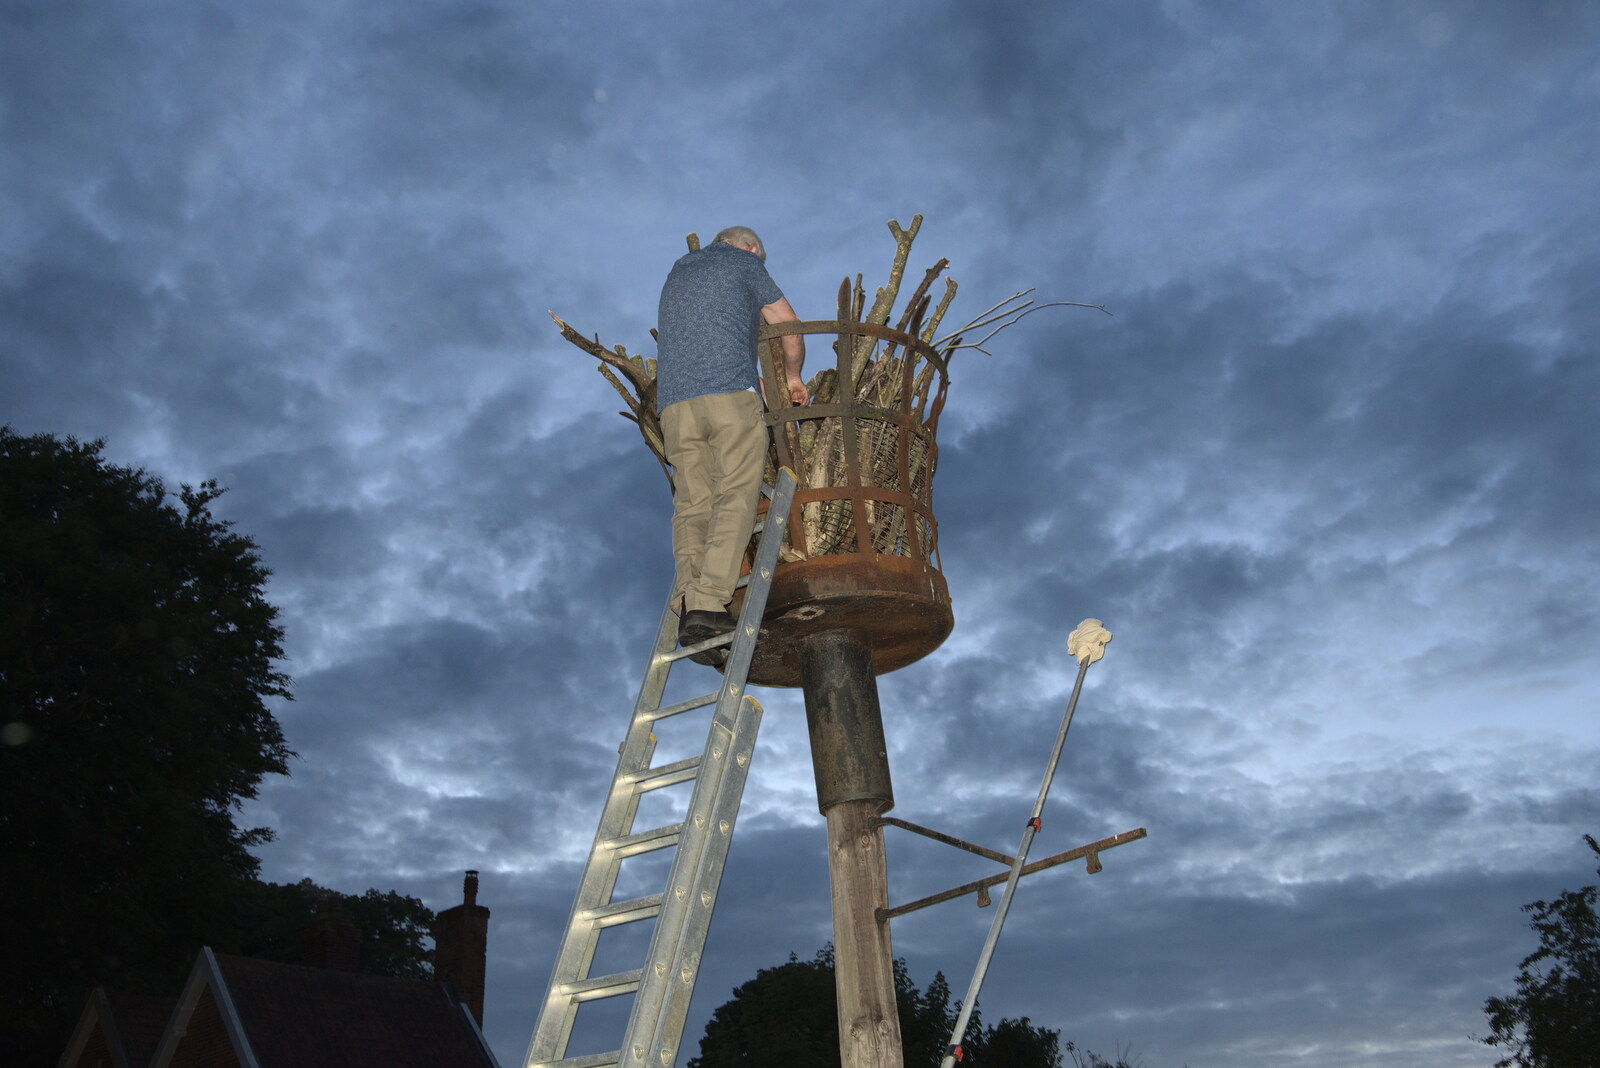 The beacon is prepared from The Lighting of the Jubilee Beacon, Eye, Suffolk - 2nd June 2022